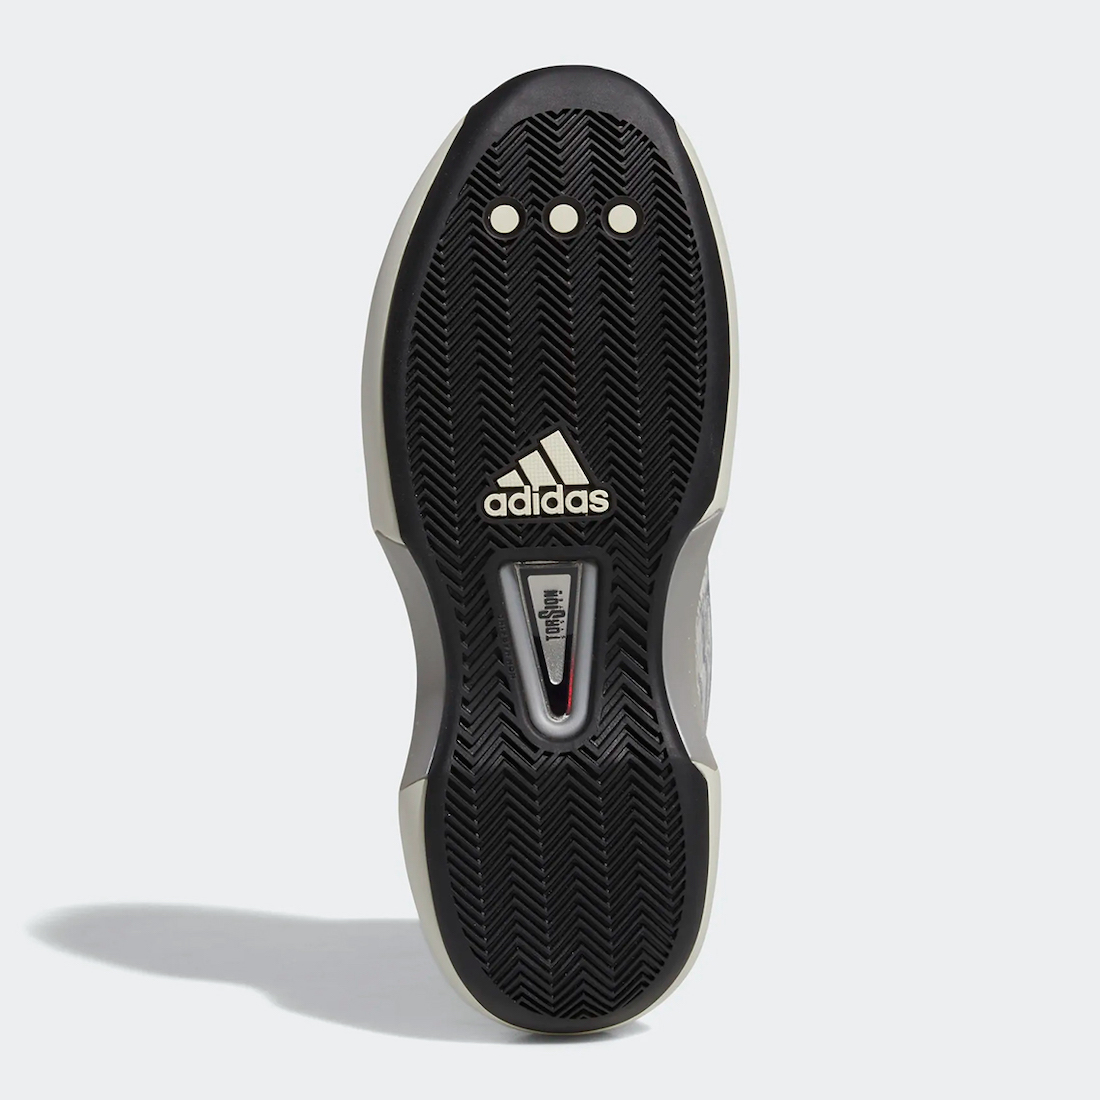 adidas line choleah padded boot pants shoes GY2405 Release Date